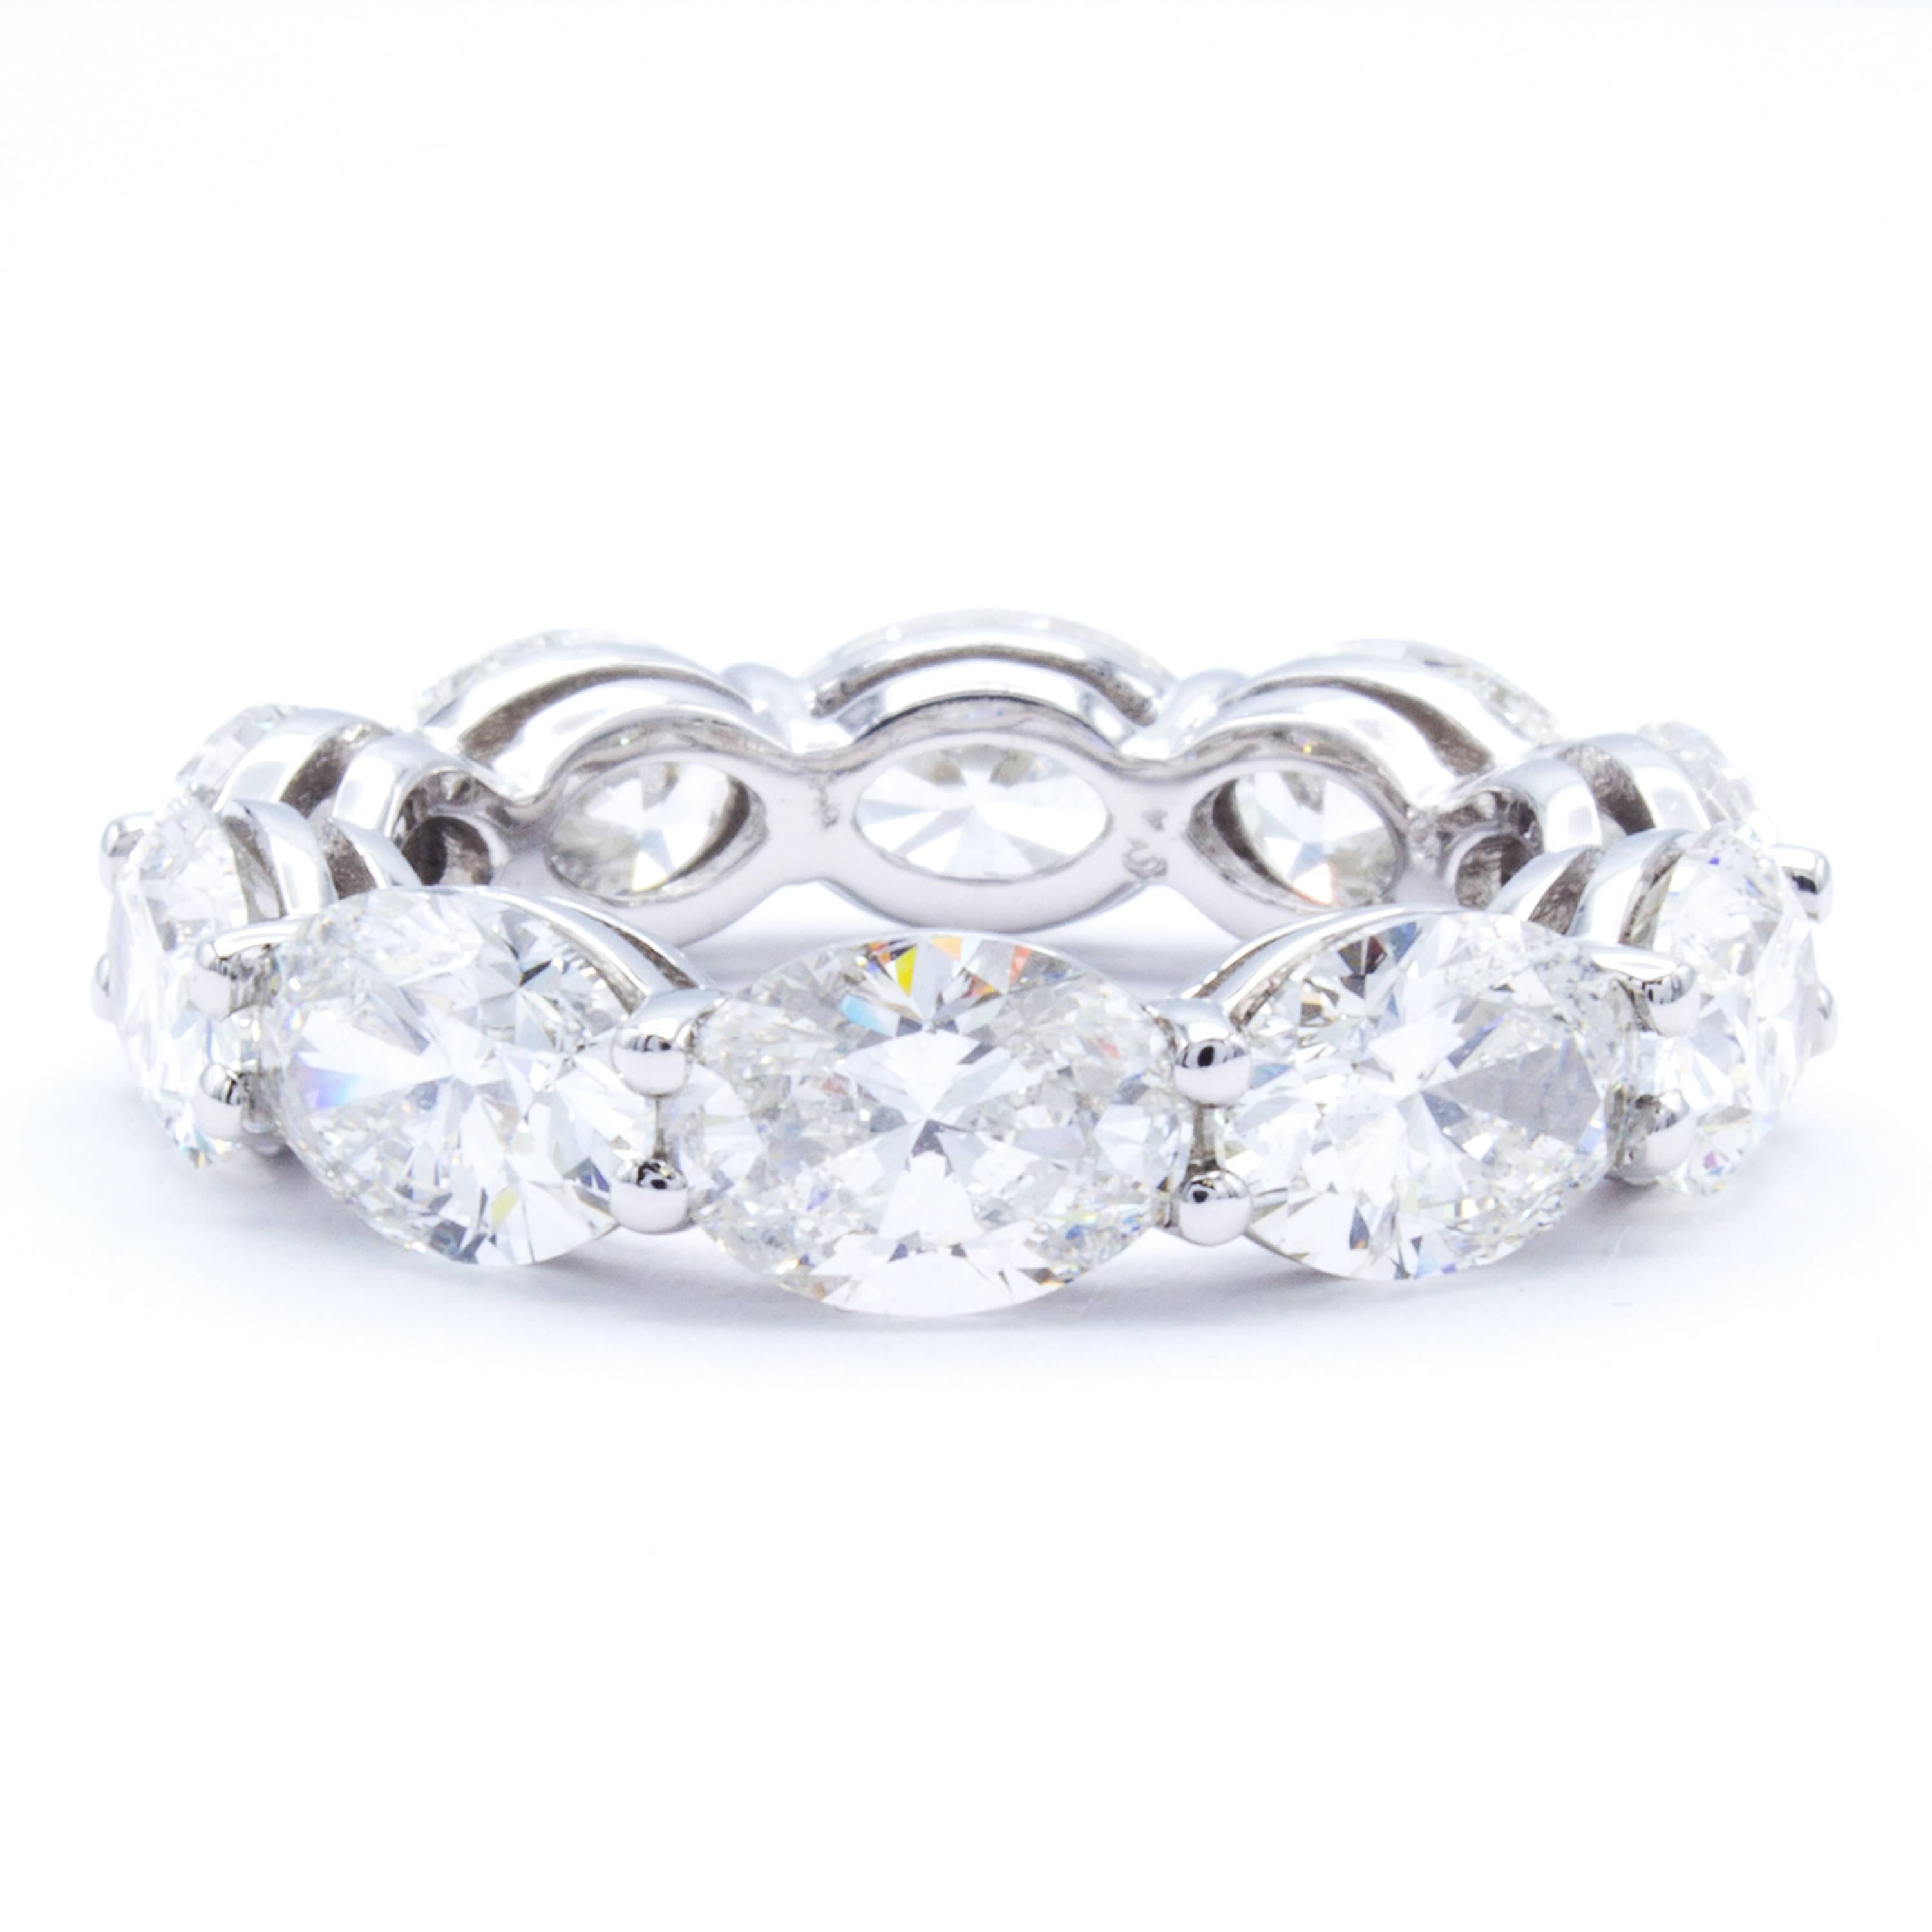 A Rosenberg Diamonds & Co. eternity band worthy of the most envious looks. A platinum setting embraces 7.44 carats of oval diamonds of exceptional character. Each diamond reveals an astounding quality and color - each perfectly matched with one